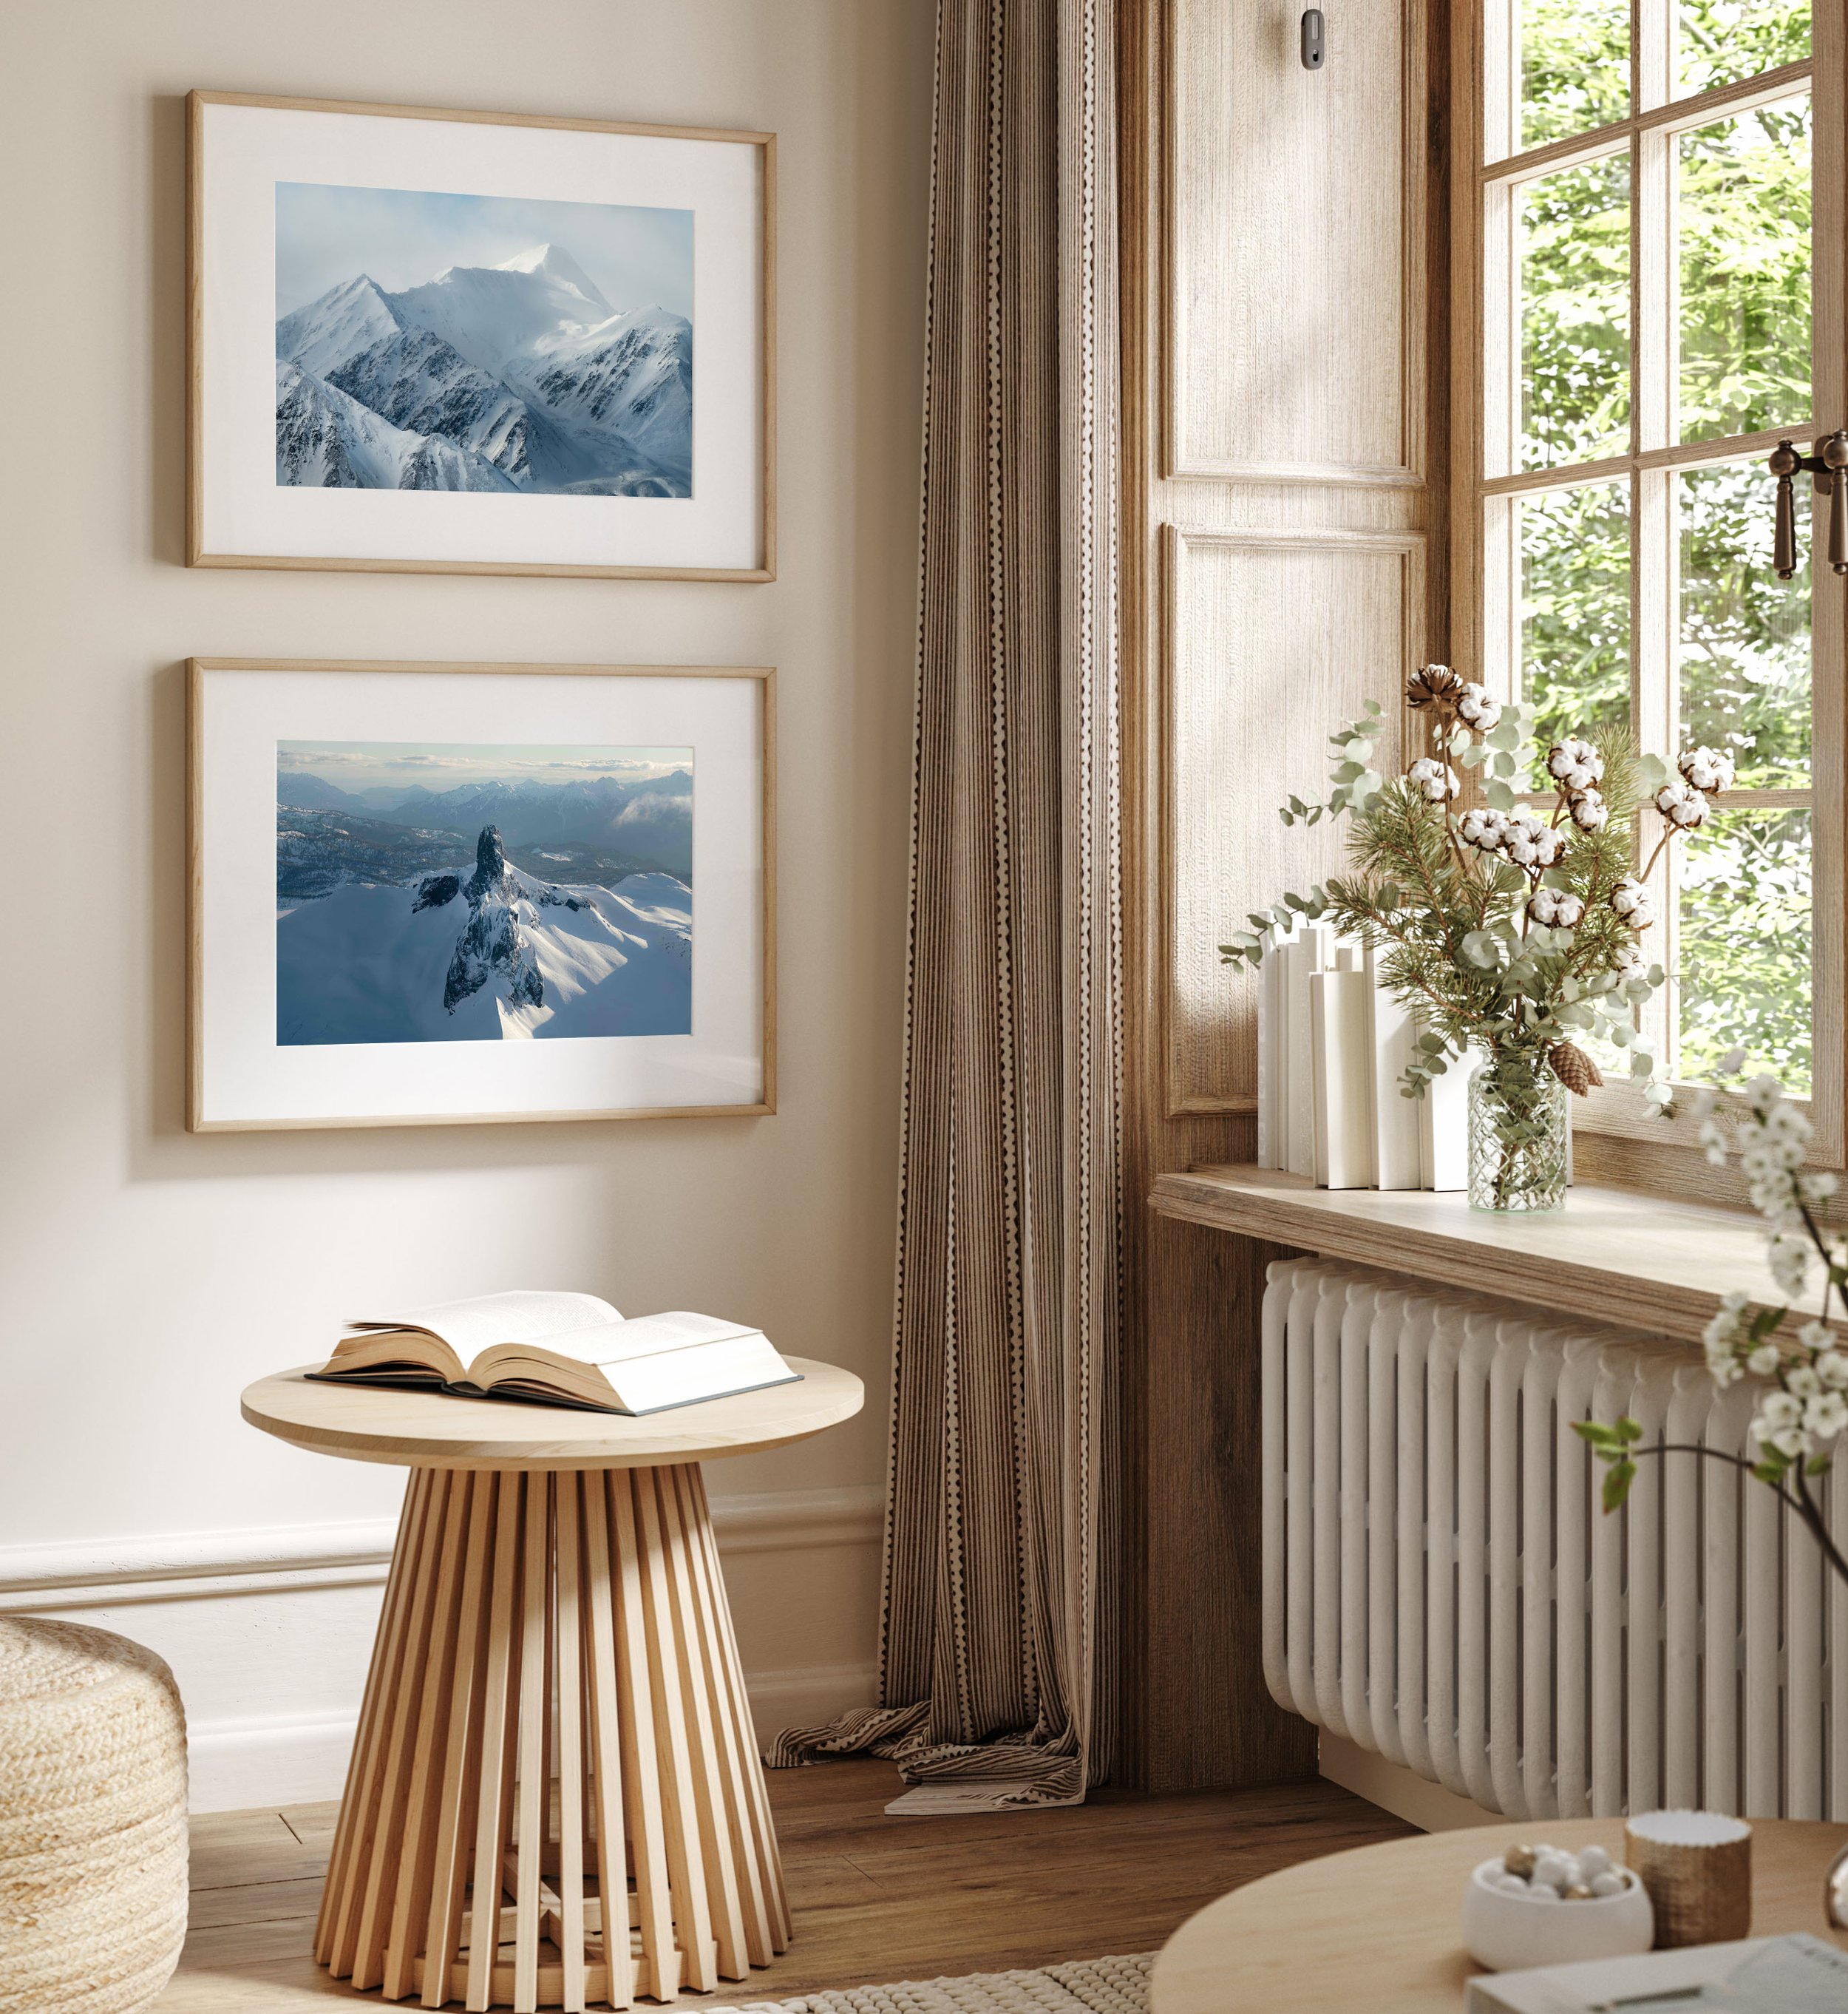 Pair of mountain scenes in medium frames in warm home - Two mountain-themed prints showcased in medium-sized frames, adding warmth to a home interior